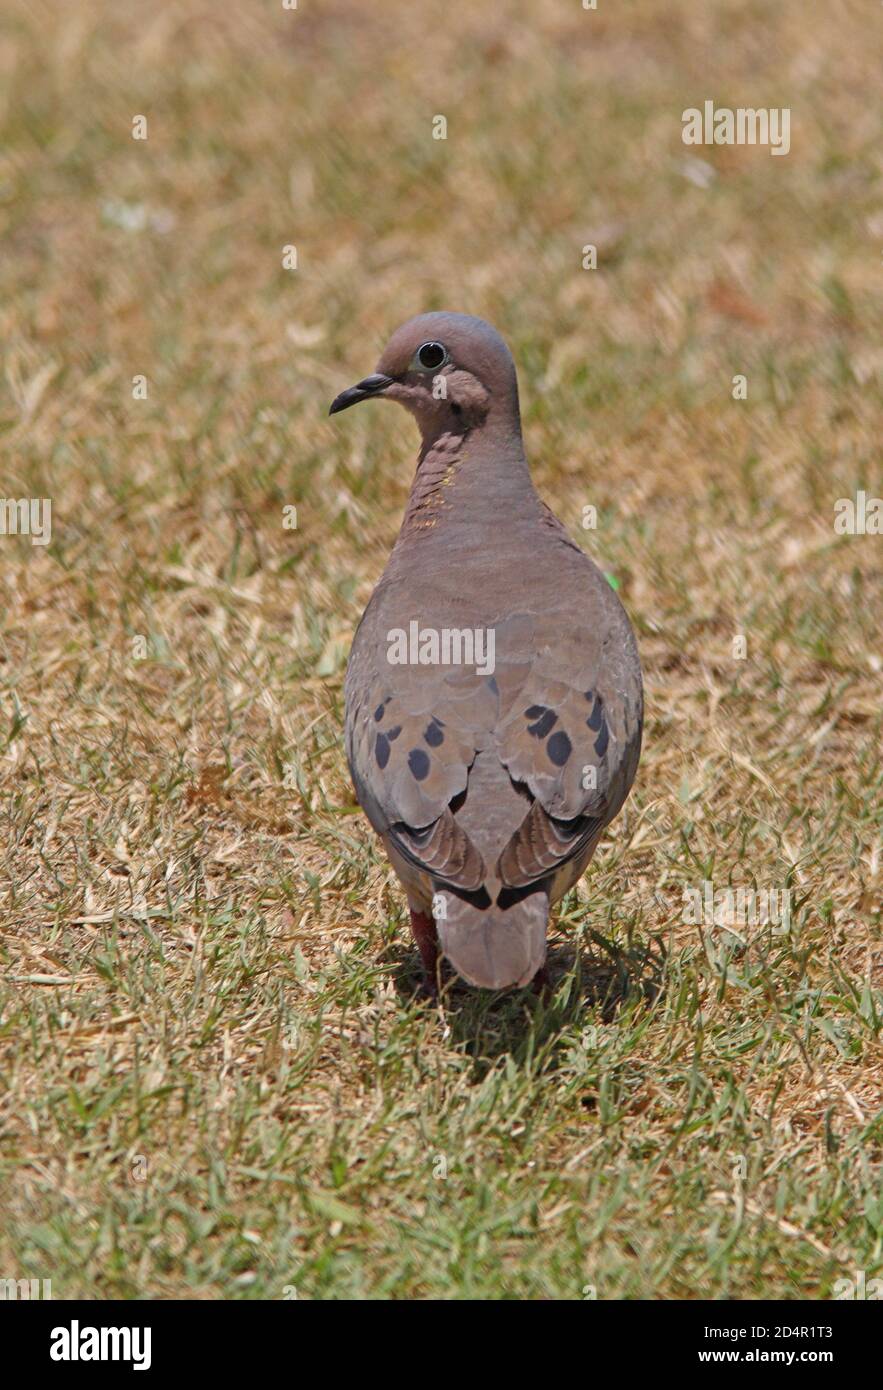 Eared Dove (Zendaia auriculata) adult standing on short grass  Buenos Aires, Argentina          January Stock Photo